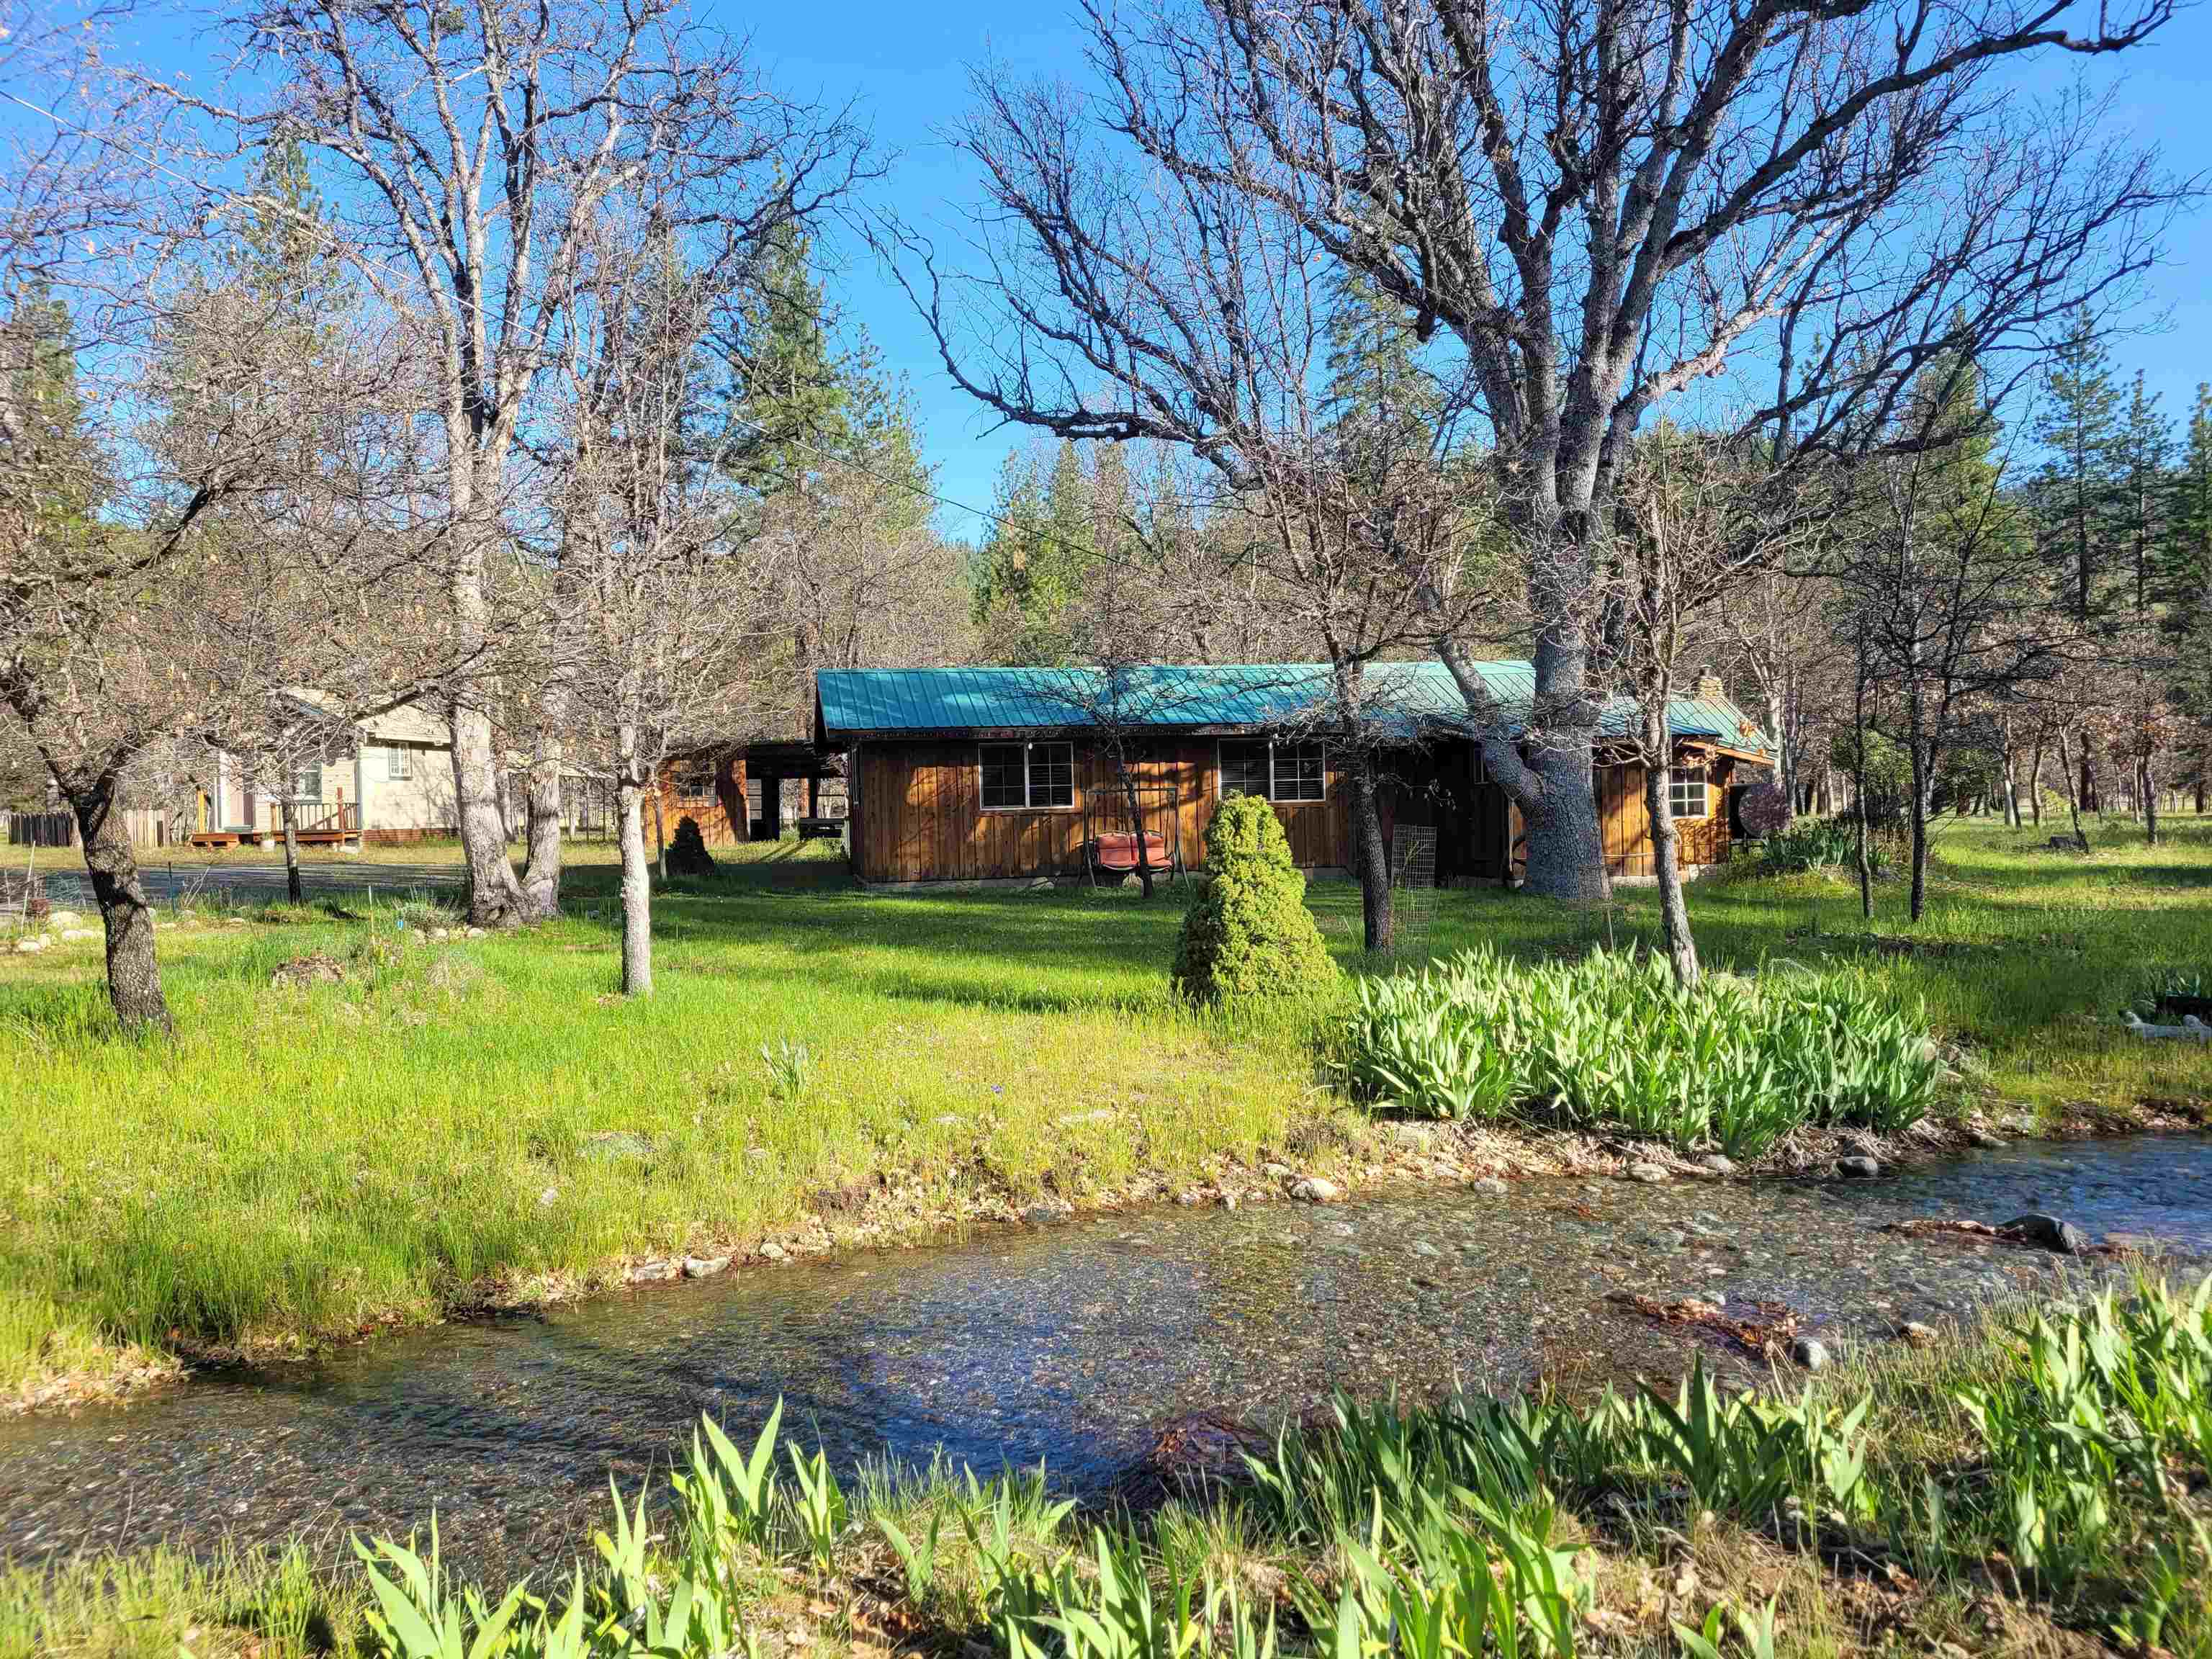 Escape the city and enjoy this Scott Valley home on almost 10 acres. This retreat has mountain views, trees, irrigation ditch (no water rights) and plentiful wildlife. This single level cabin style 3 bedroom home has been partially remodeled and updated over the years including a recent bathroom update, new flooring in kitchen and interior paint. Has fiber optics for fast speed internet. Has a detached Bunkhouse with a large attached carport. Be more self-sufficient with the organic garden with greenhouse, some fruit trees and a chicken coop. There is a 10 gpm well drilled in 2015 and the system utilizes the old water storage tank for efficiency. Nice neighborhood and centrally located in Scott Valley. Move in ready. By Appointment only to Pre-qualified Buyers. NOTE: The accuracy of the information provided is deemed reliable but is not guaranteed, is subject to change and should be independently verified.